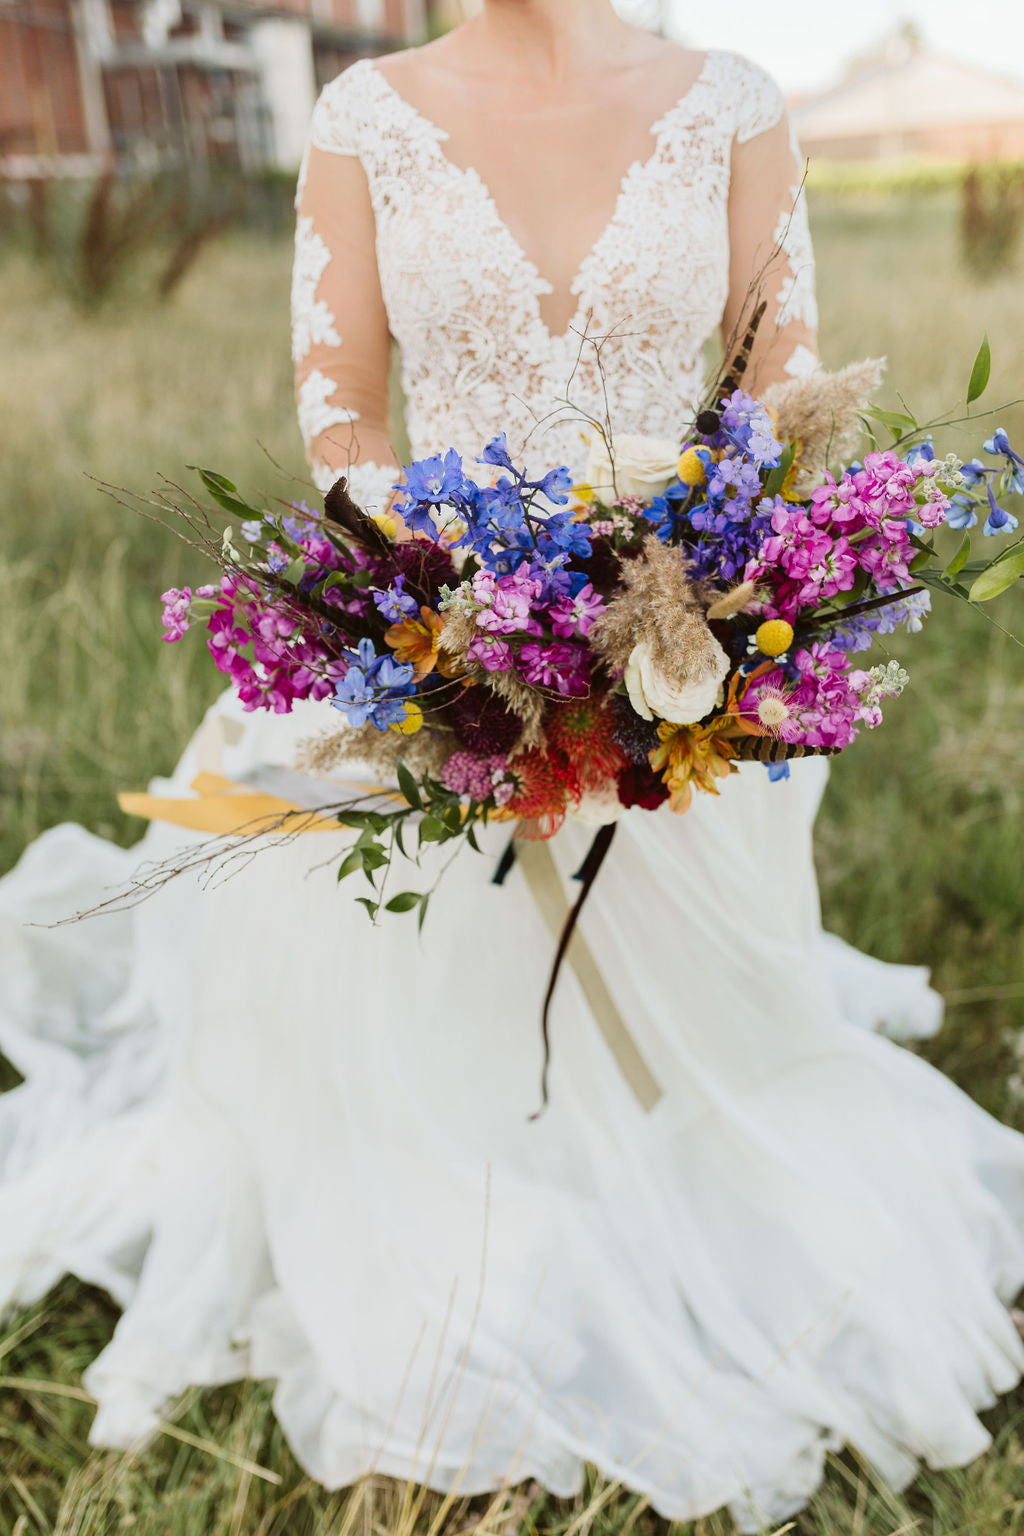 A bride holds a jewel toned wedding bouquet with berry pink and Very Peri periwinkle flowers